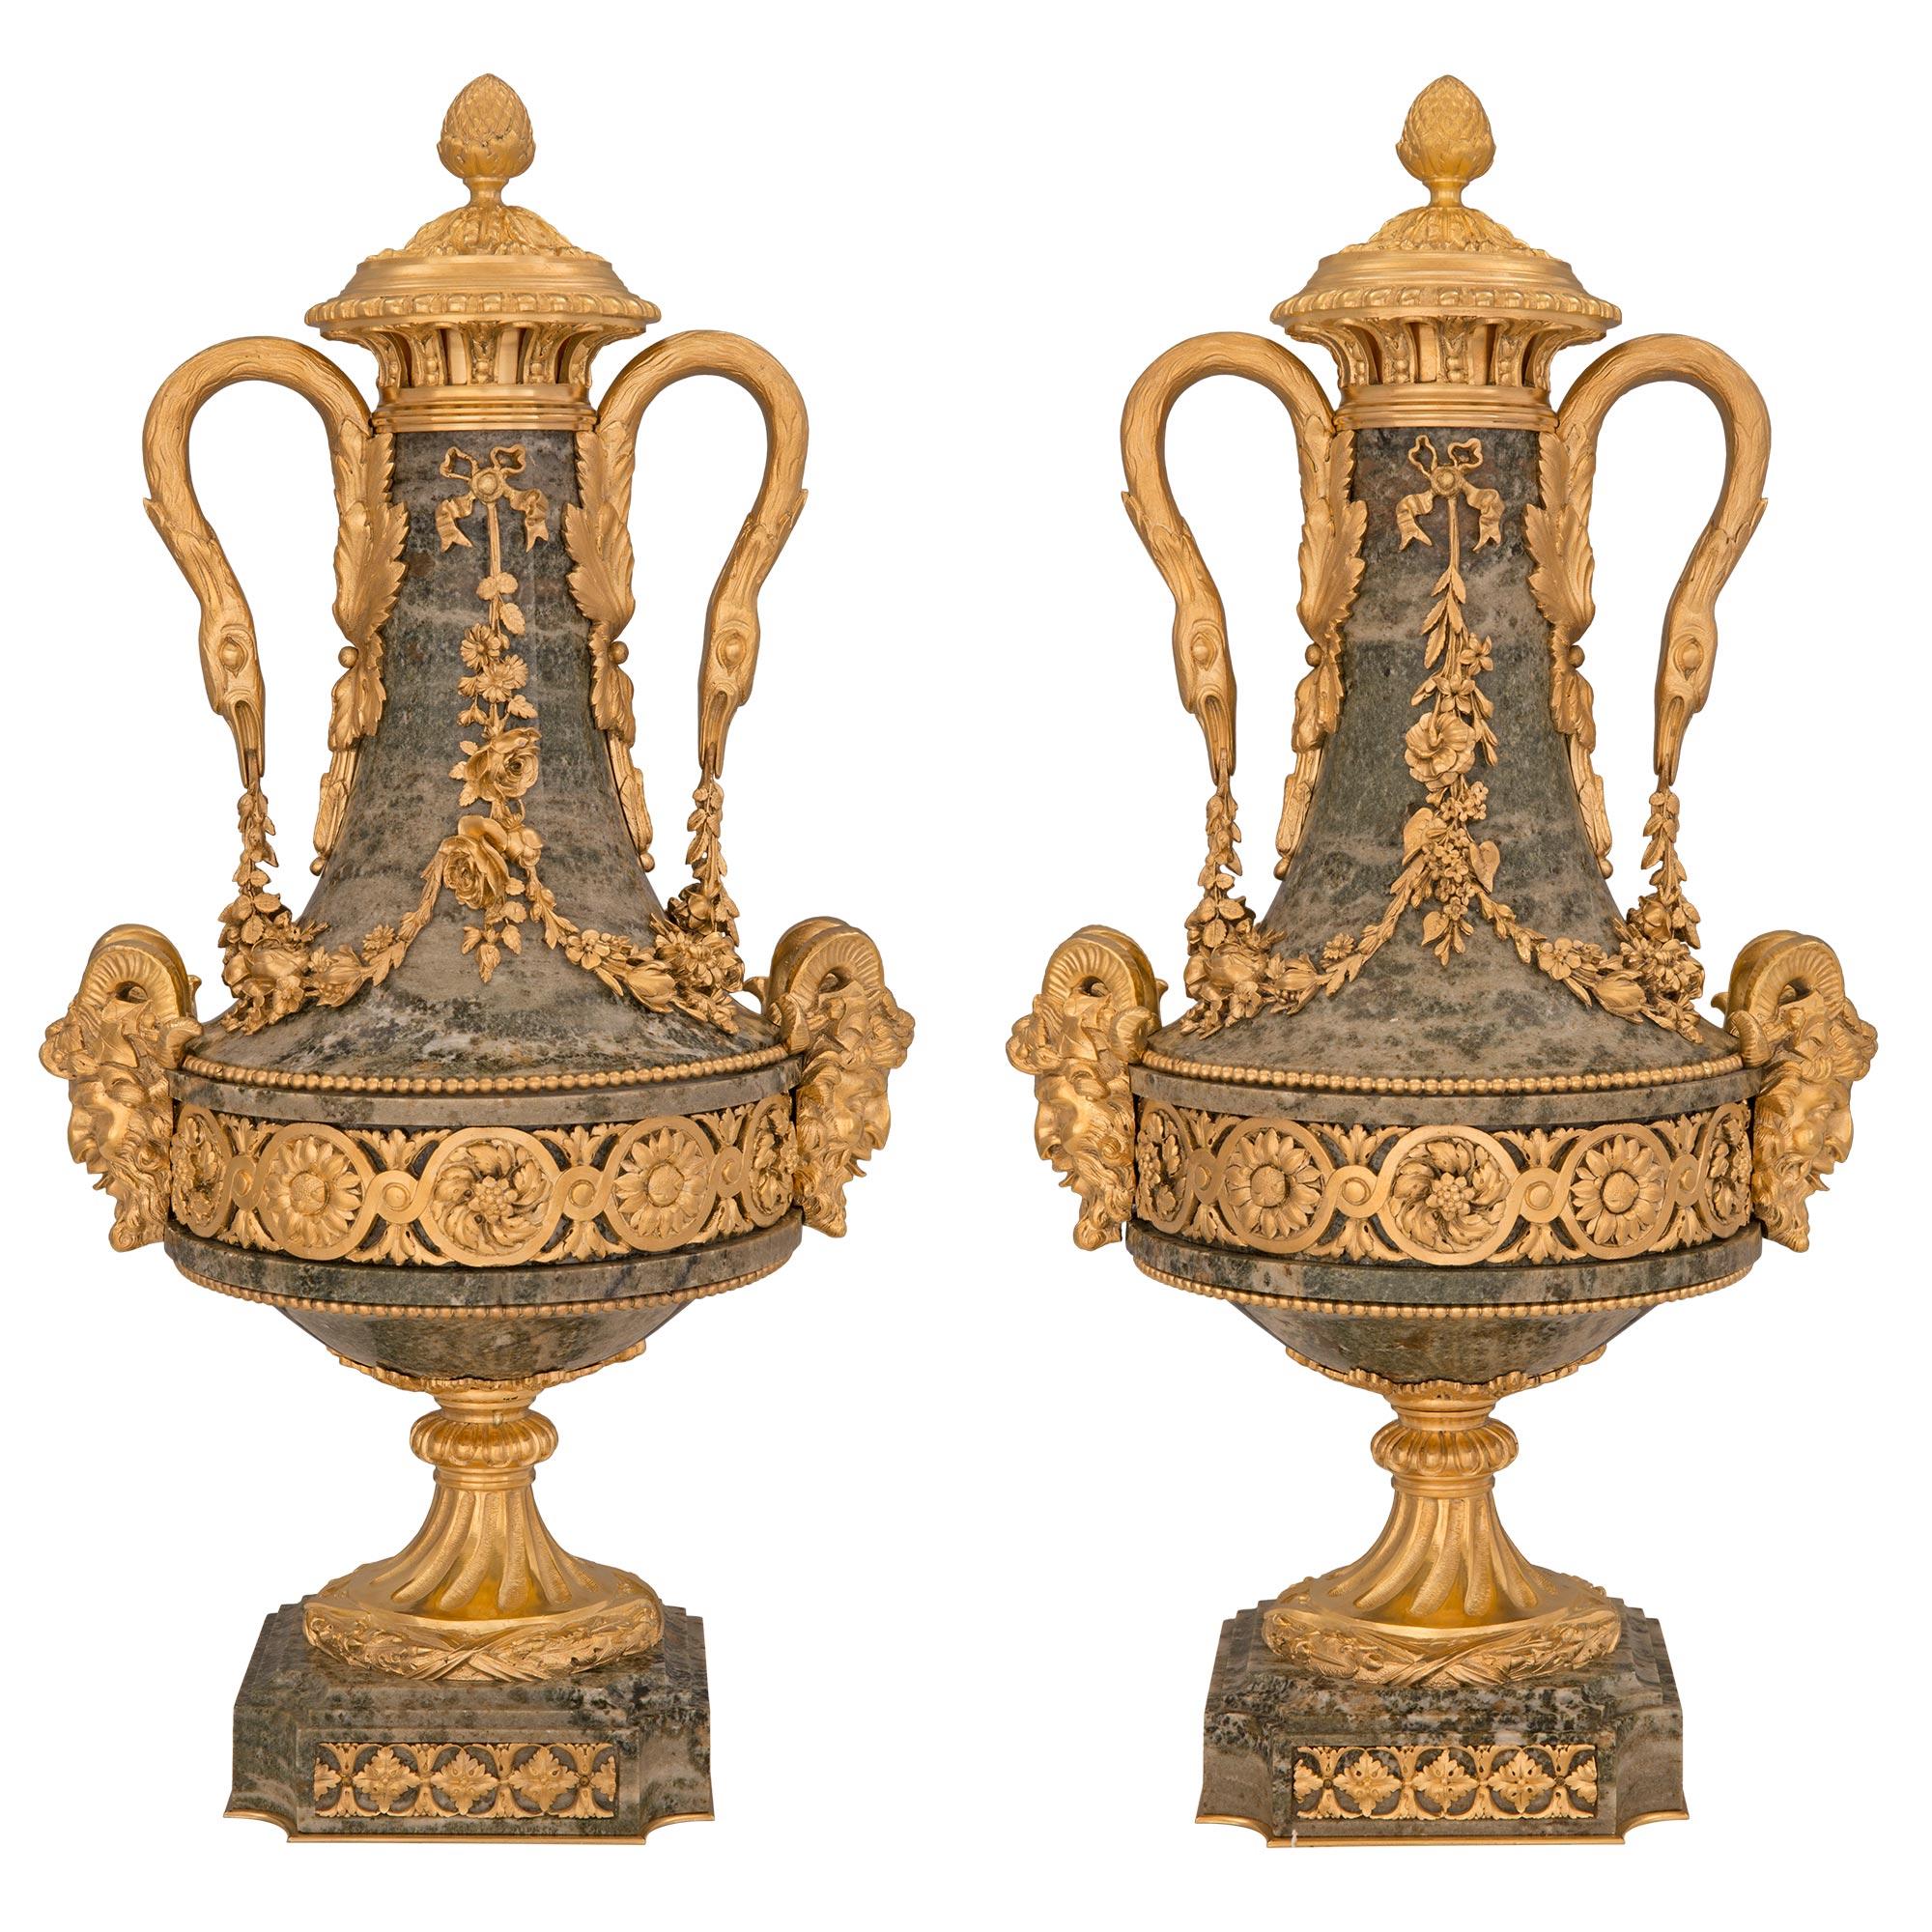 Pair of French 19th Century Louis XVI St. Fluorspar and Ormolu Lidded Urns